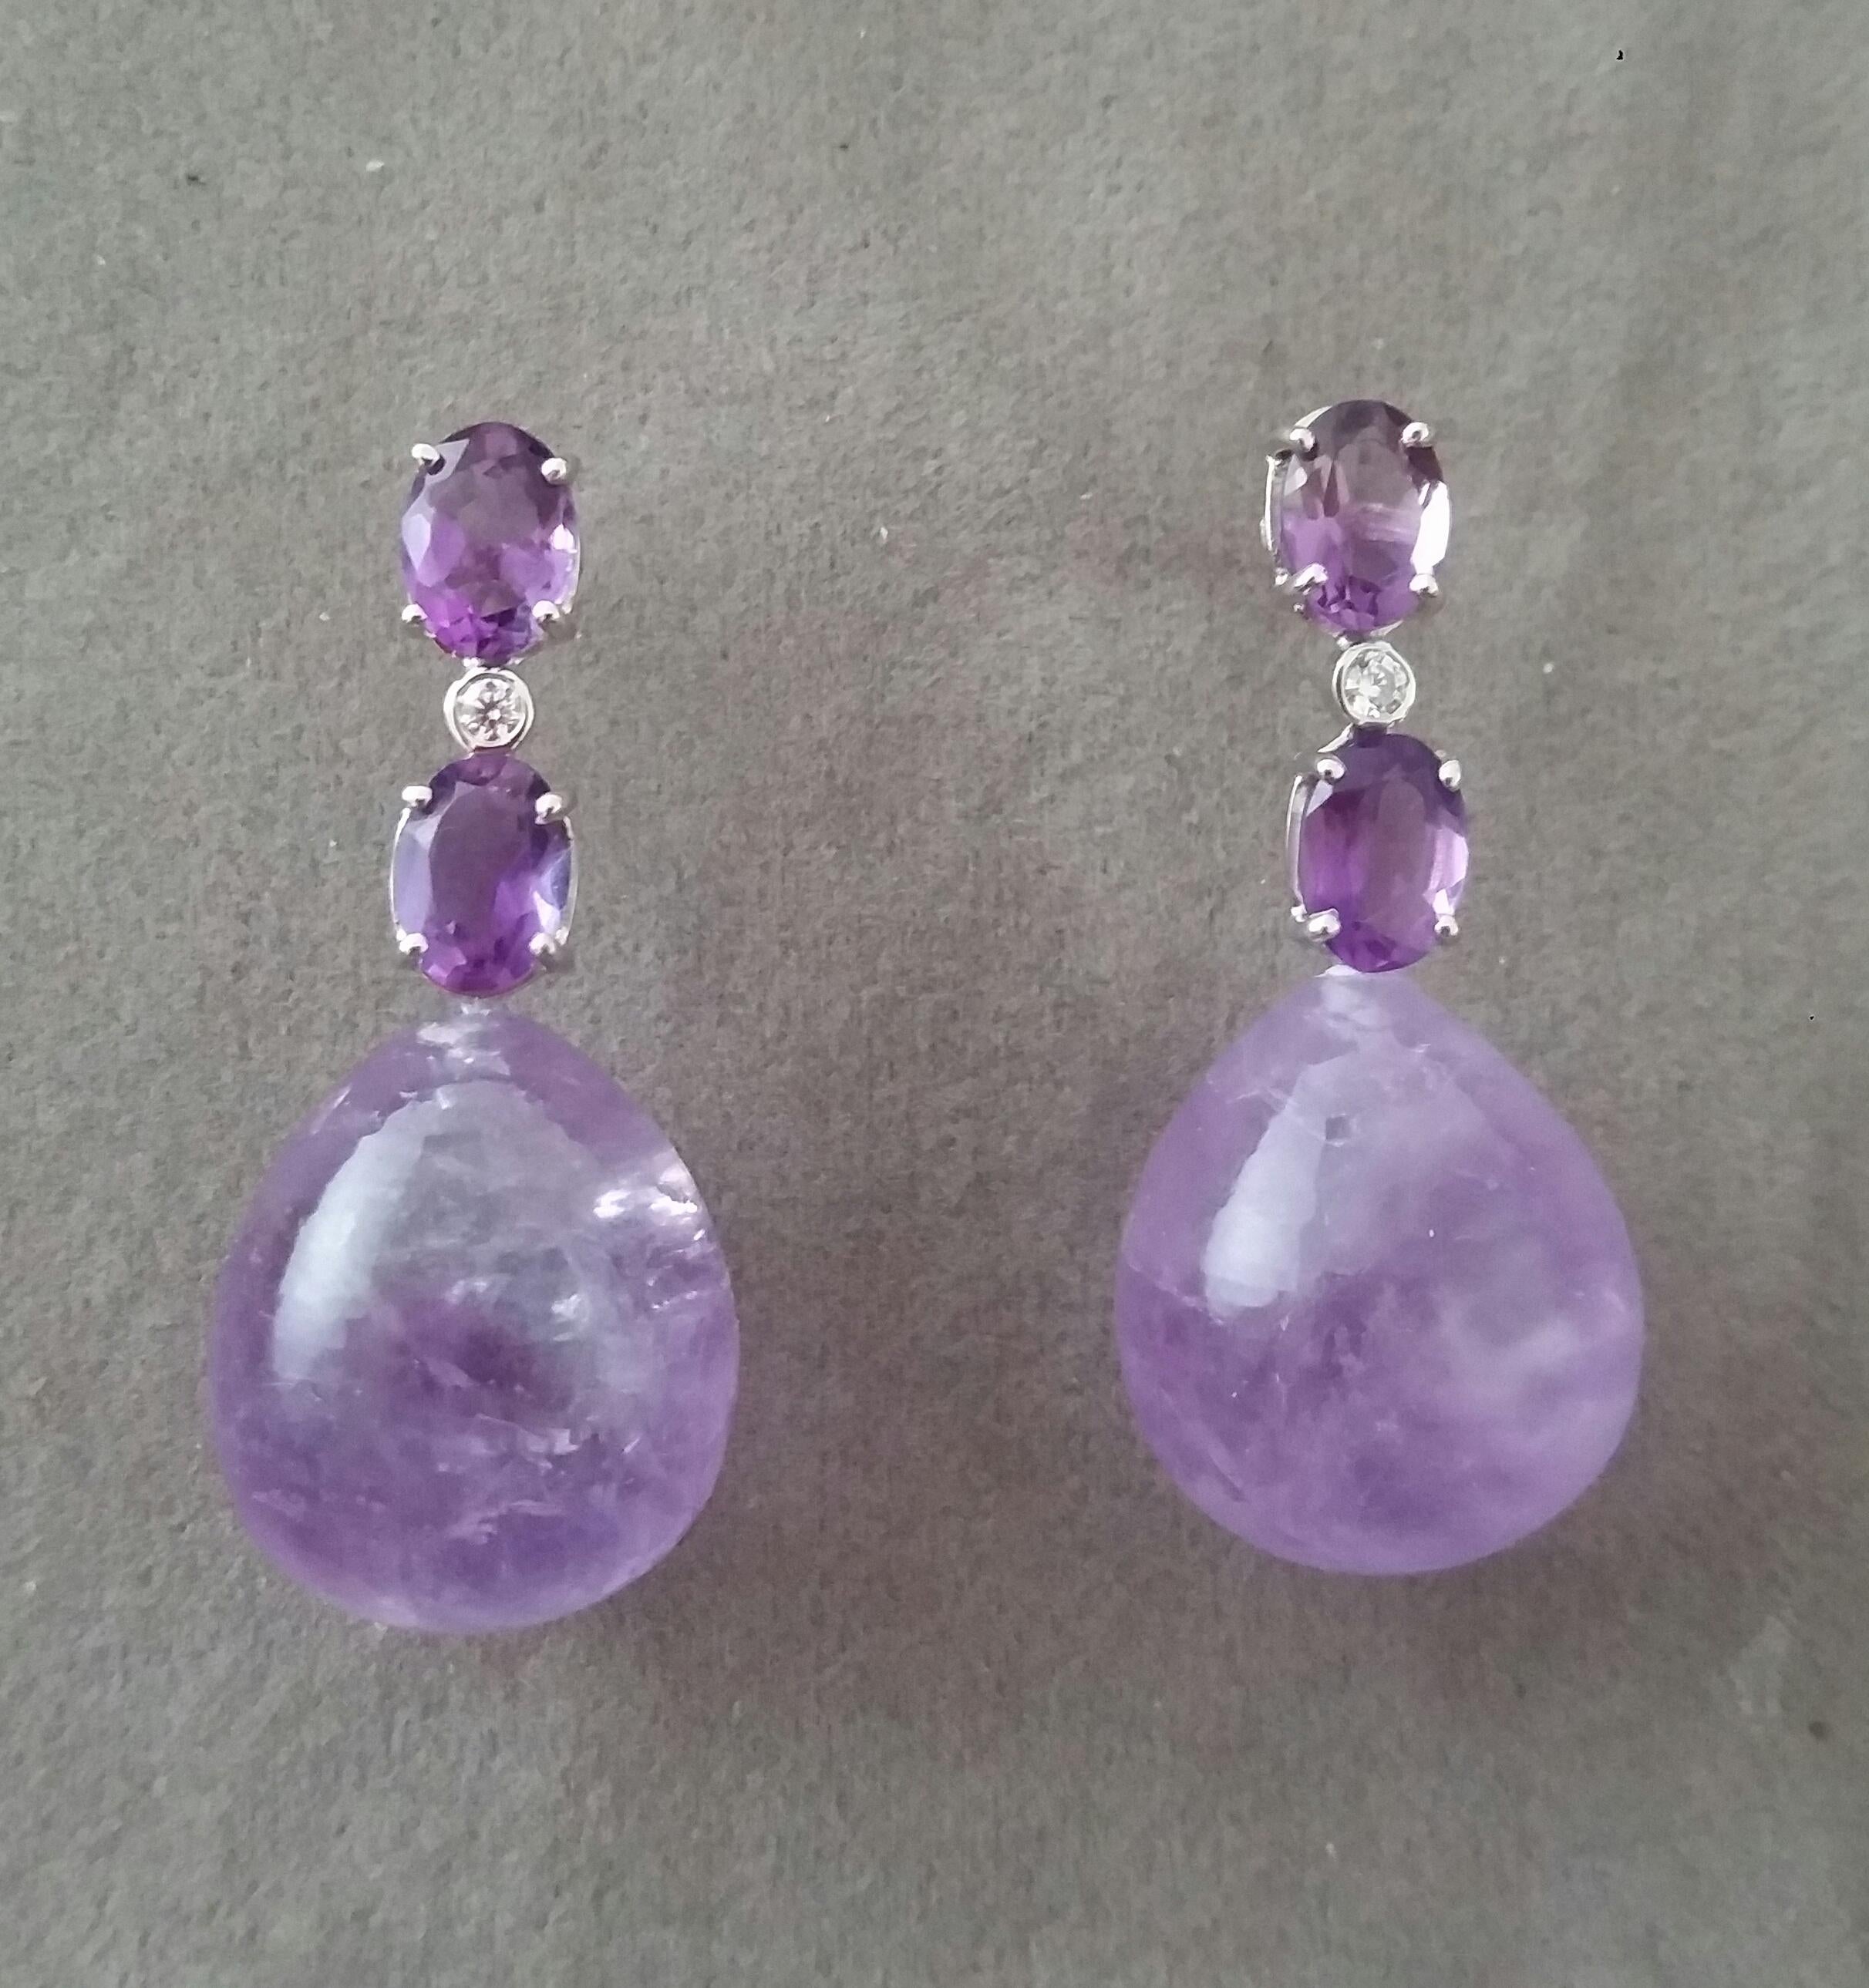 Elegant and completely handmade Earrings consisting of an upper part of 2 oval shape Faceted Amethyst of 5 mm x 7 mm set together in 14 Kt white gold with a  small diamond in the middle, at the bottom 2 Plain Round Amethyst Drop Earrings measuring